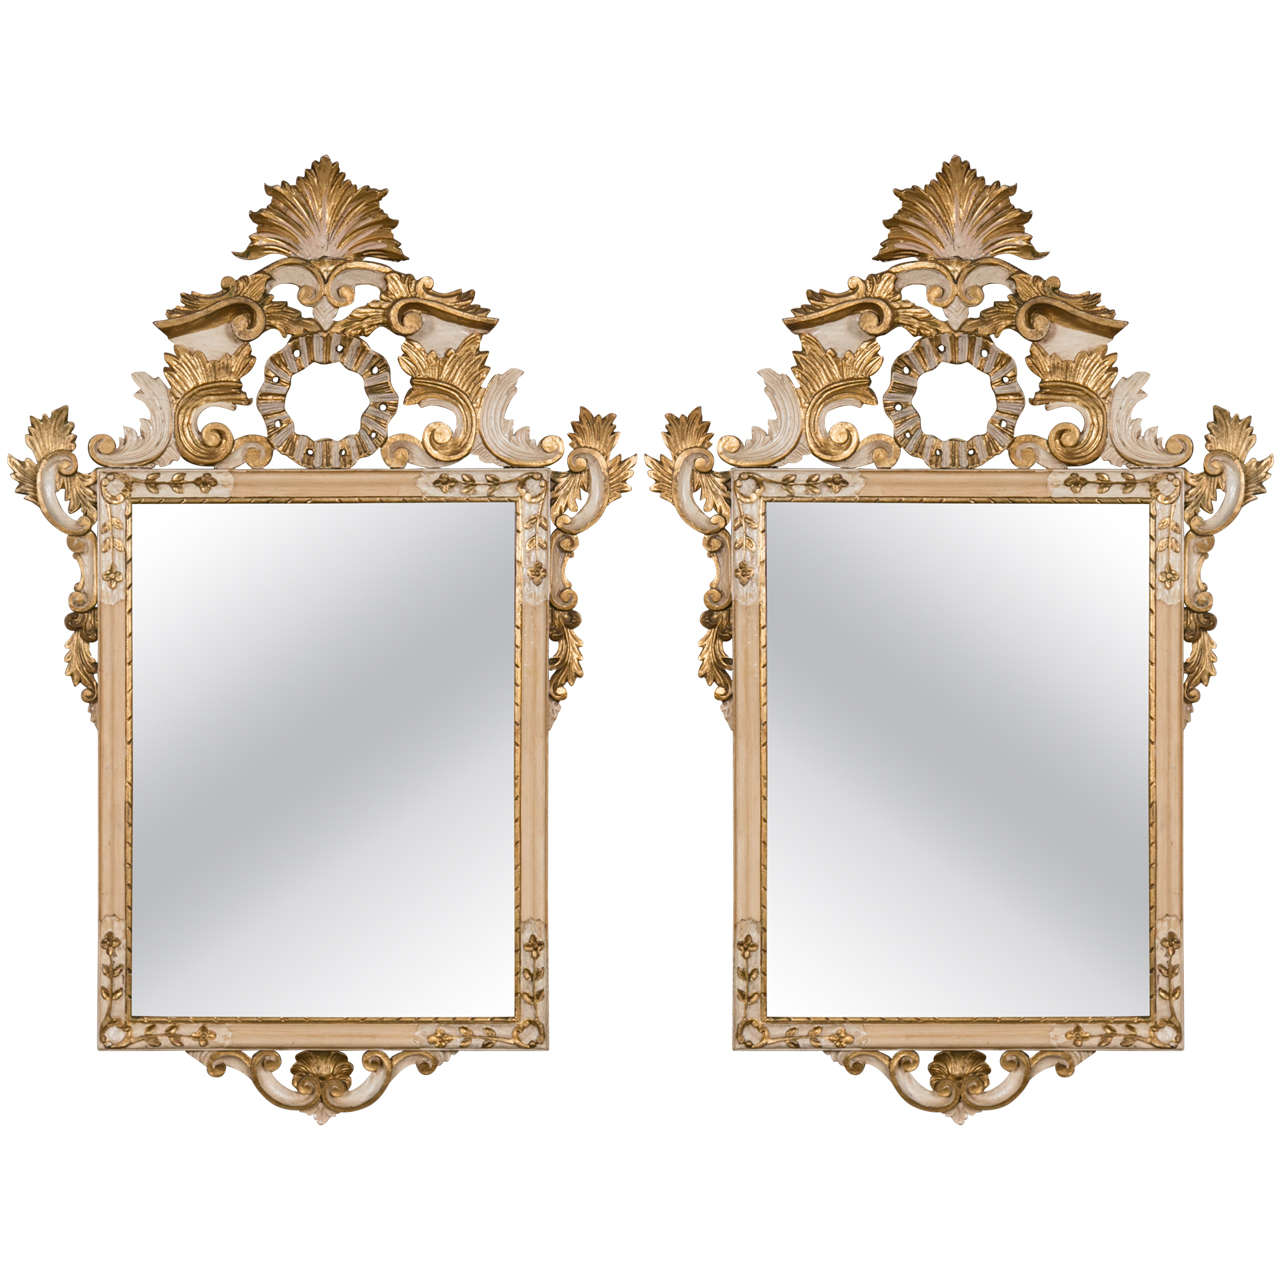 Pair of Parcel Gilt Beautifully Carved Italian Rococo Mirrors